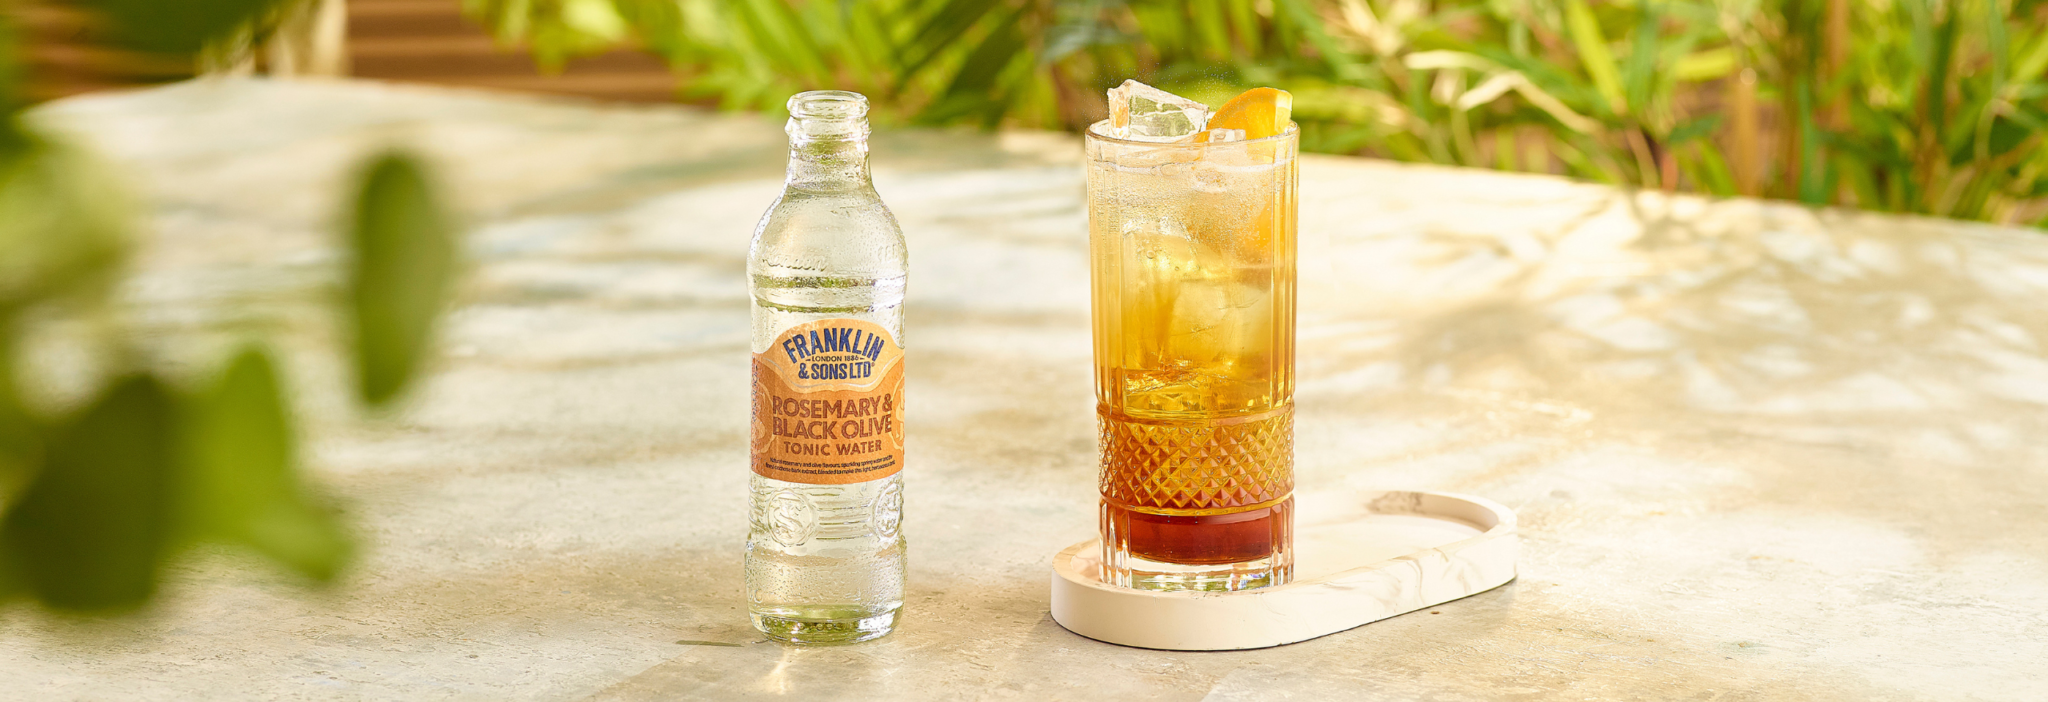 Mediterranean Spritz cocktail with Franklin & Sons Rosemary & Black Olive Tonic Water | Franklin & Sons